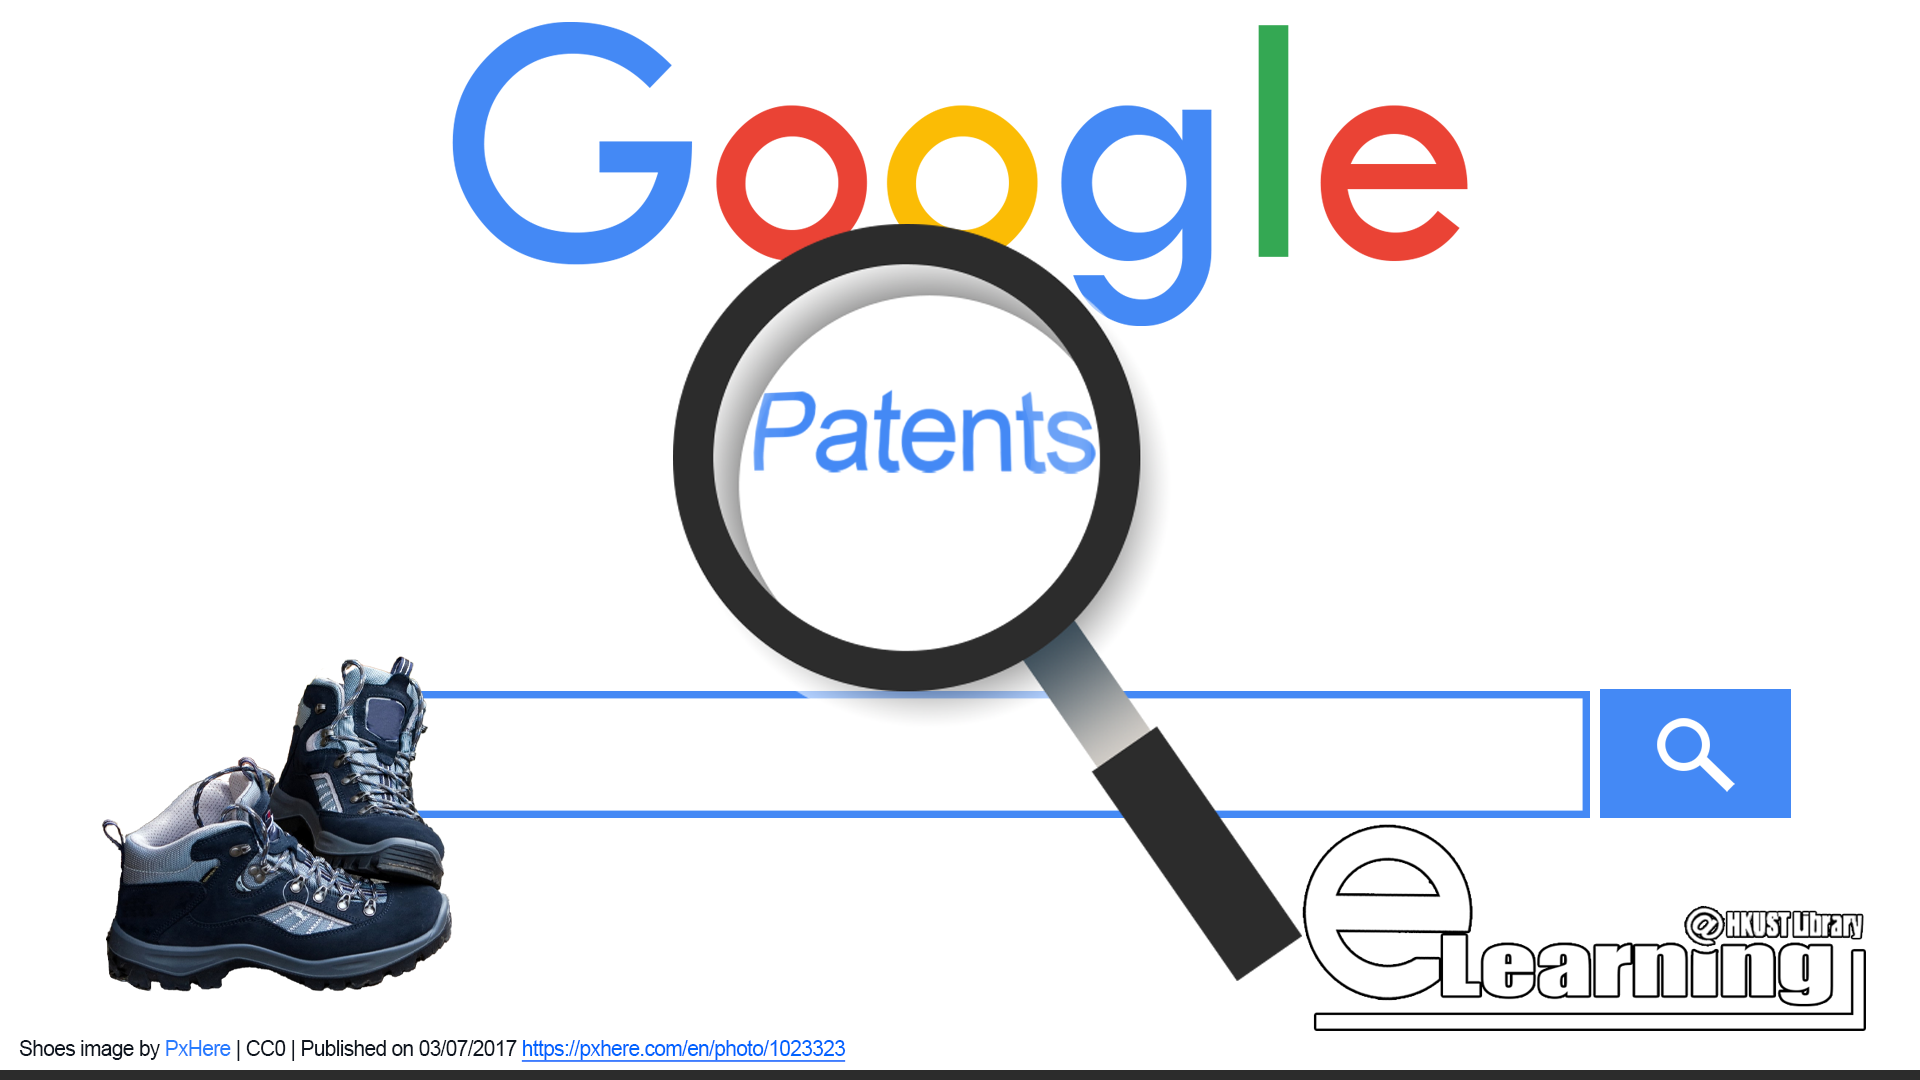 Why and How to use Google Patent Search - Waterproof Shoes(00:03:57)